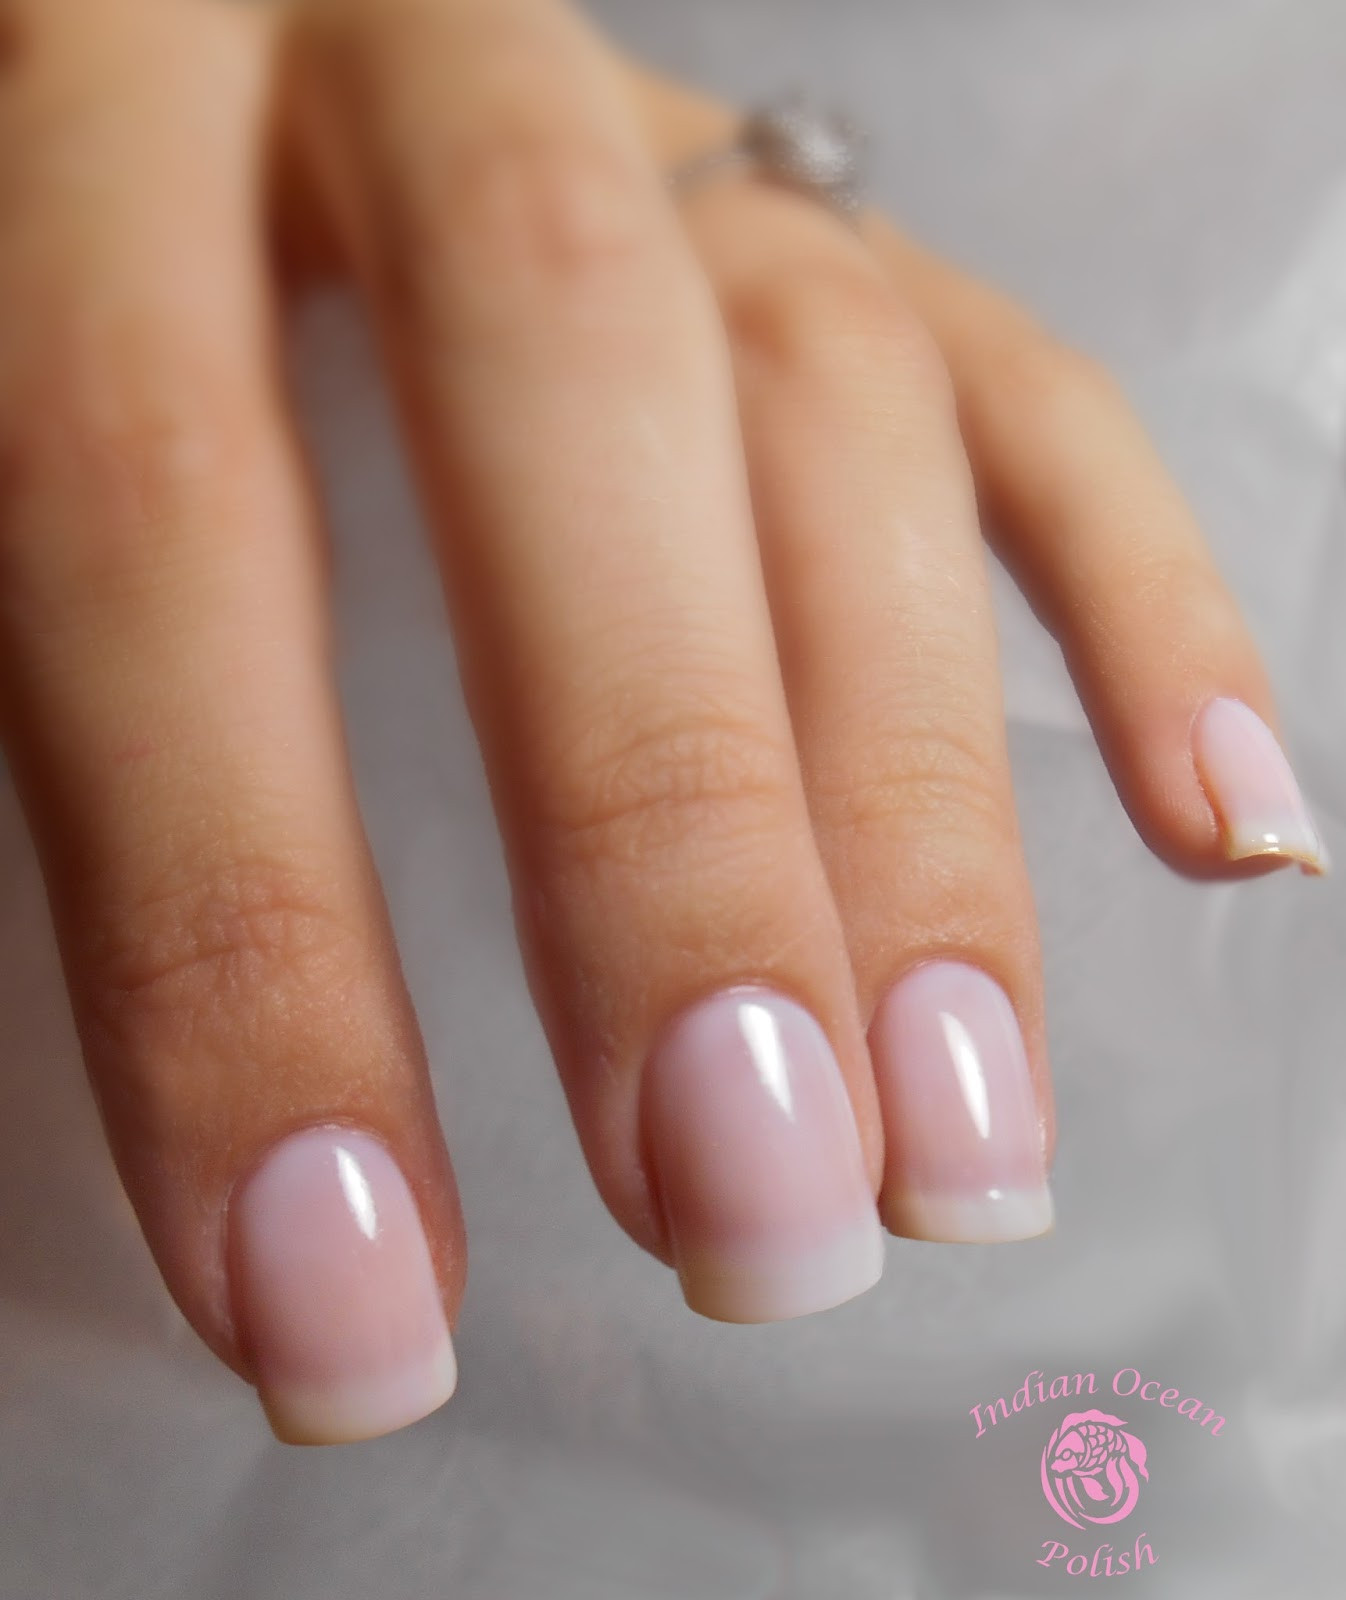 Wedding Nails Pictures
 Indian Ocean Polish August 2013